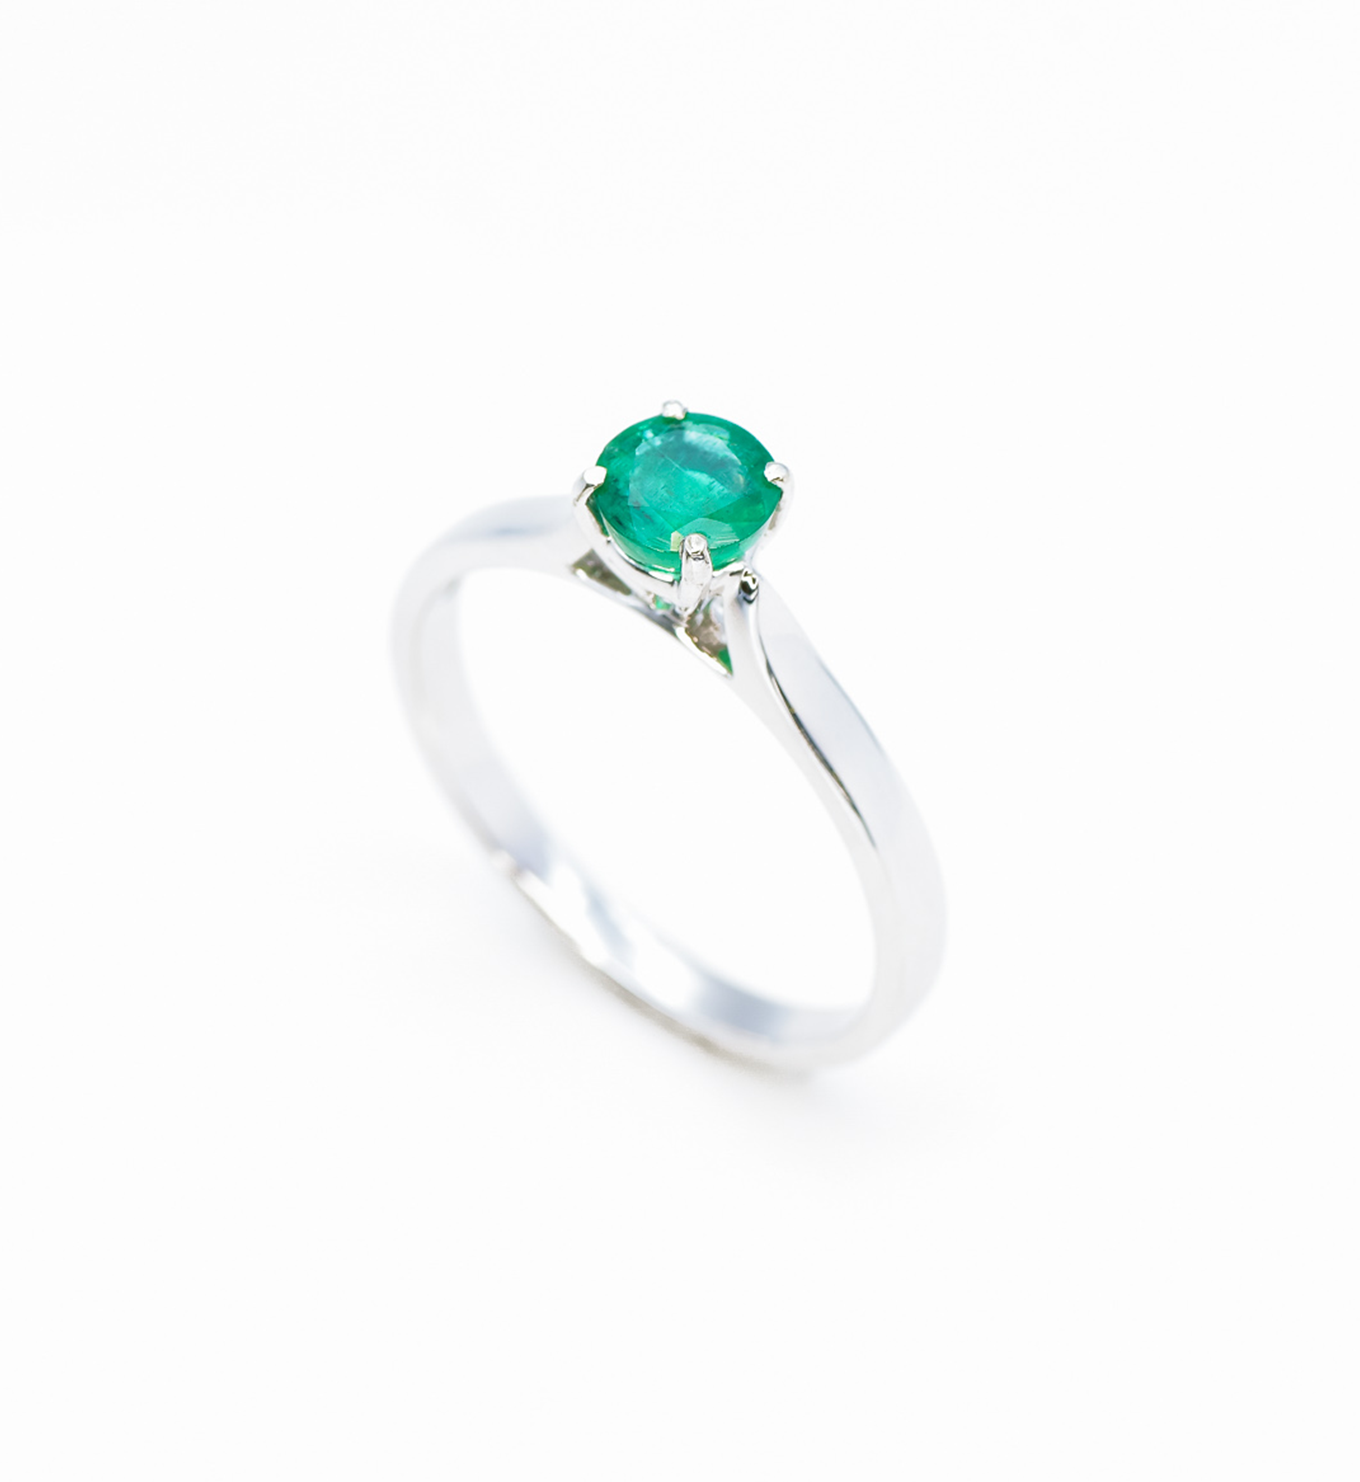 Certified Emerald Ring, Solitaire White Gold Ring, Zambian Emerald Ring